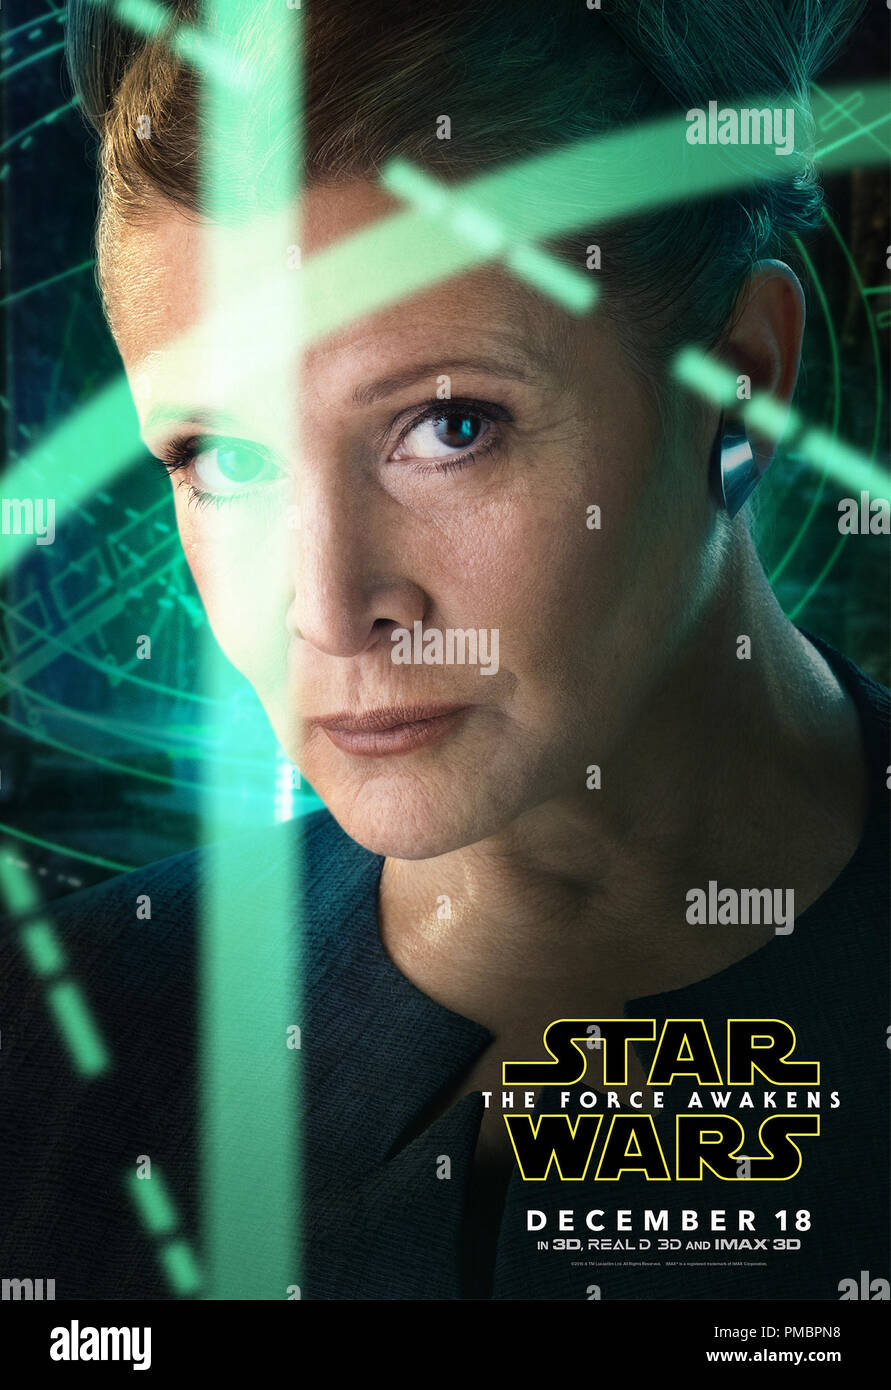 Star Wars: Episode VII - The Force Awakens" (2015) Leia character poster  (Carrie Fisher) © 2015 Lucasfilm Stock Photo - Alamy